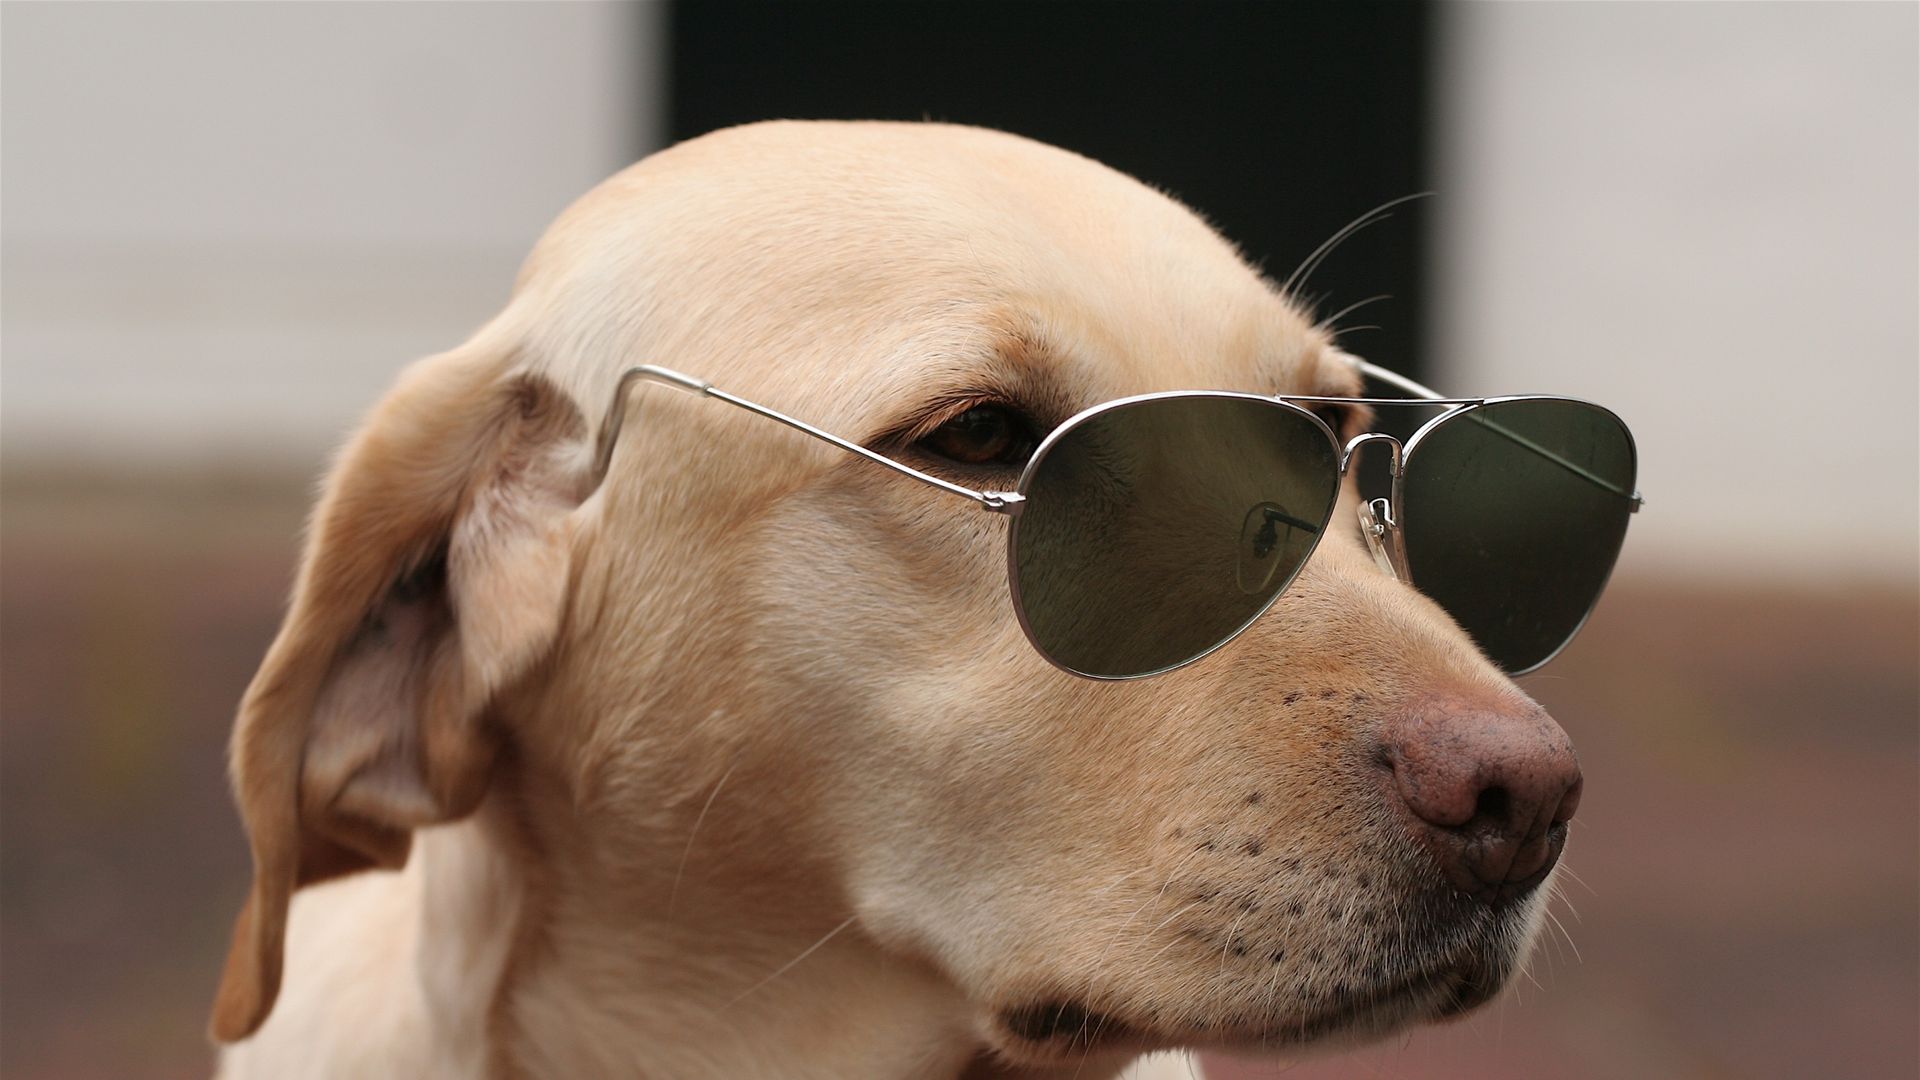 Download wallpaper 1920x1080 dog, face, sunglasses full hd, hdtv, fhd,  1080p hd background